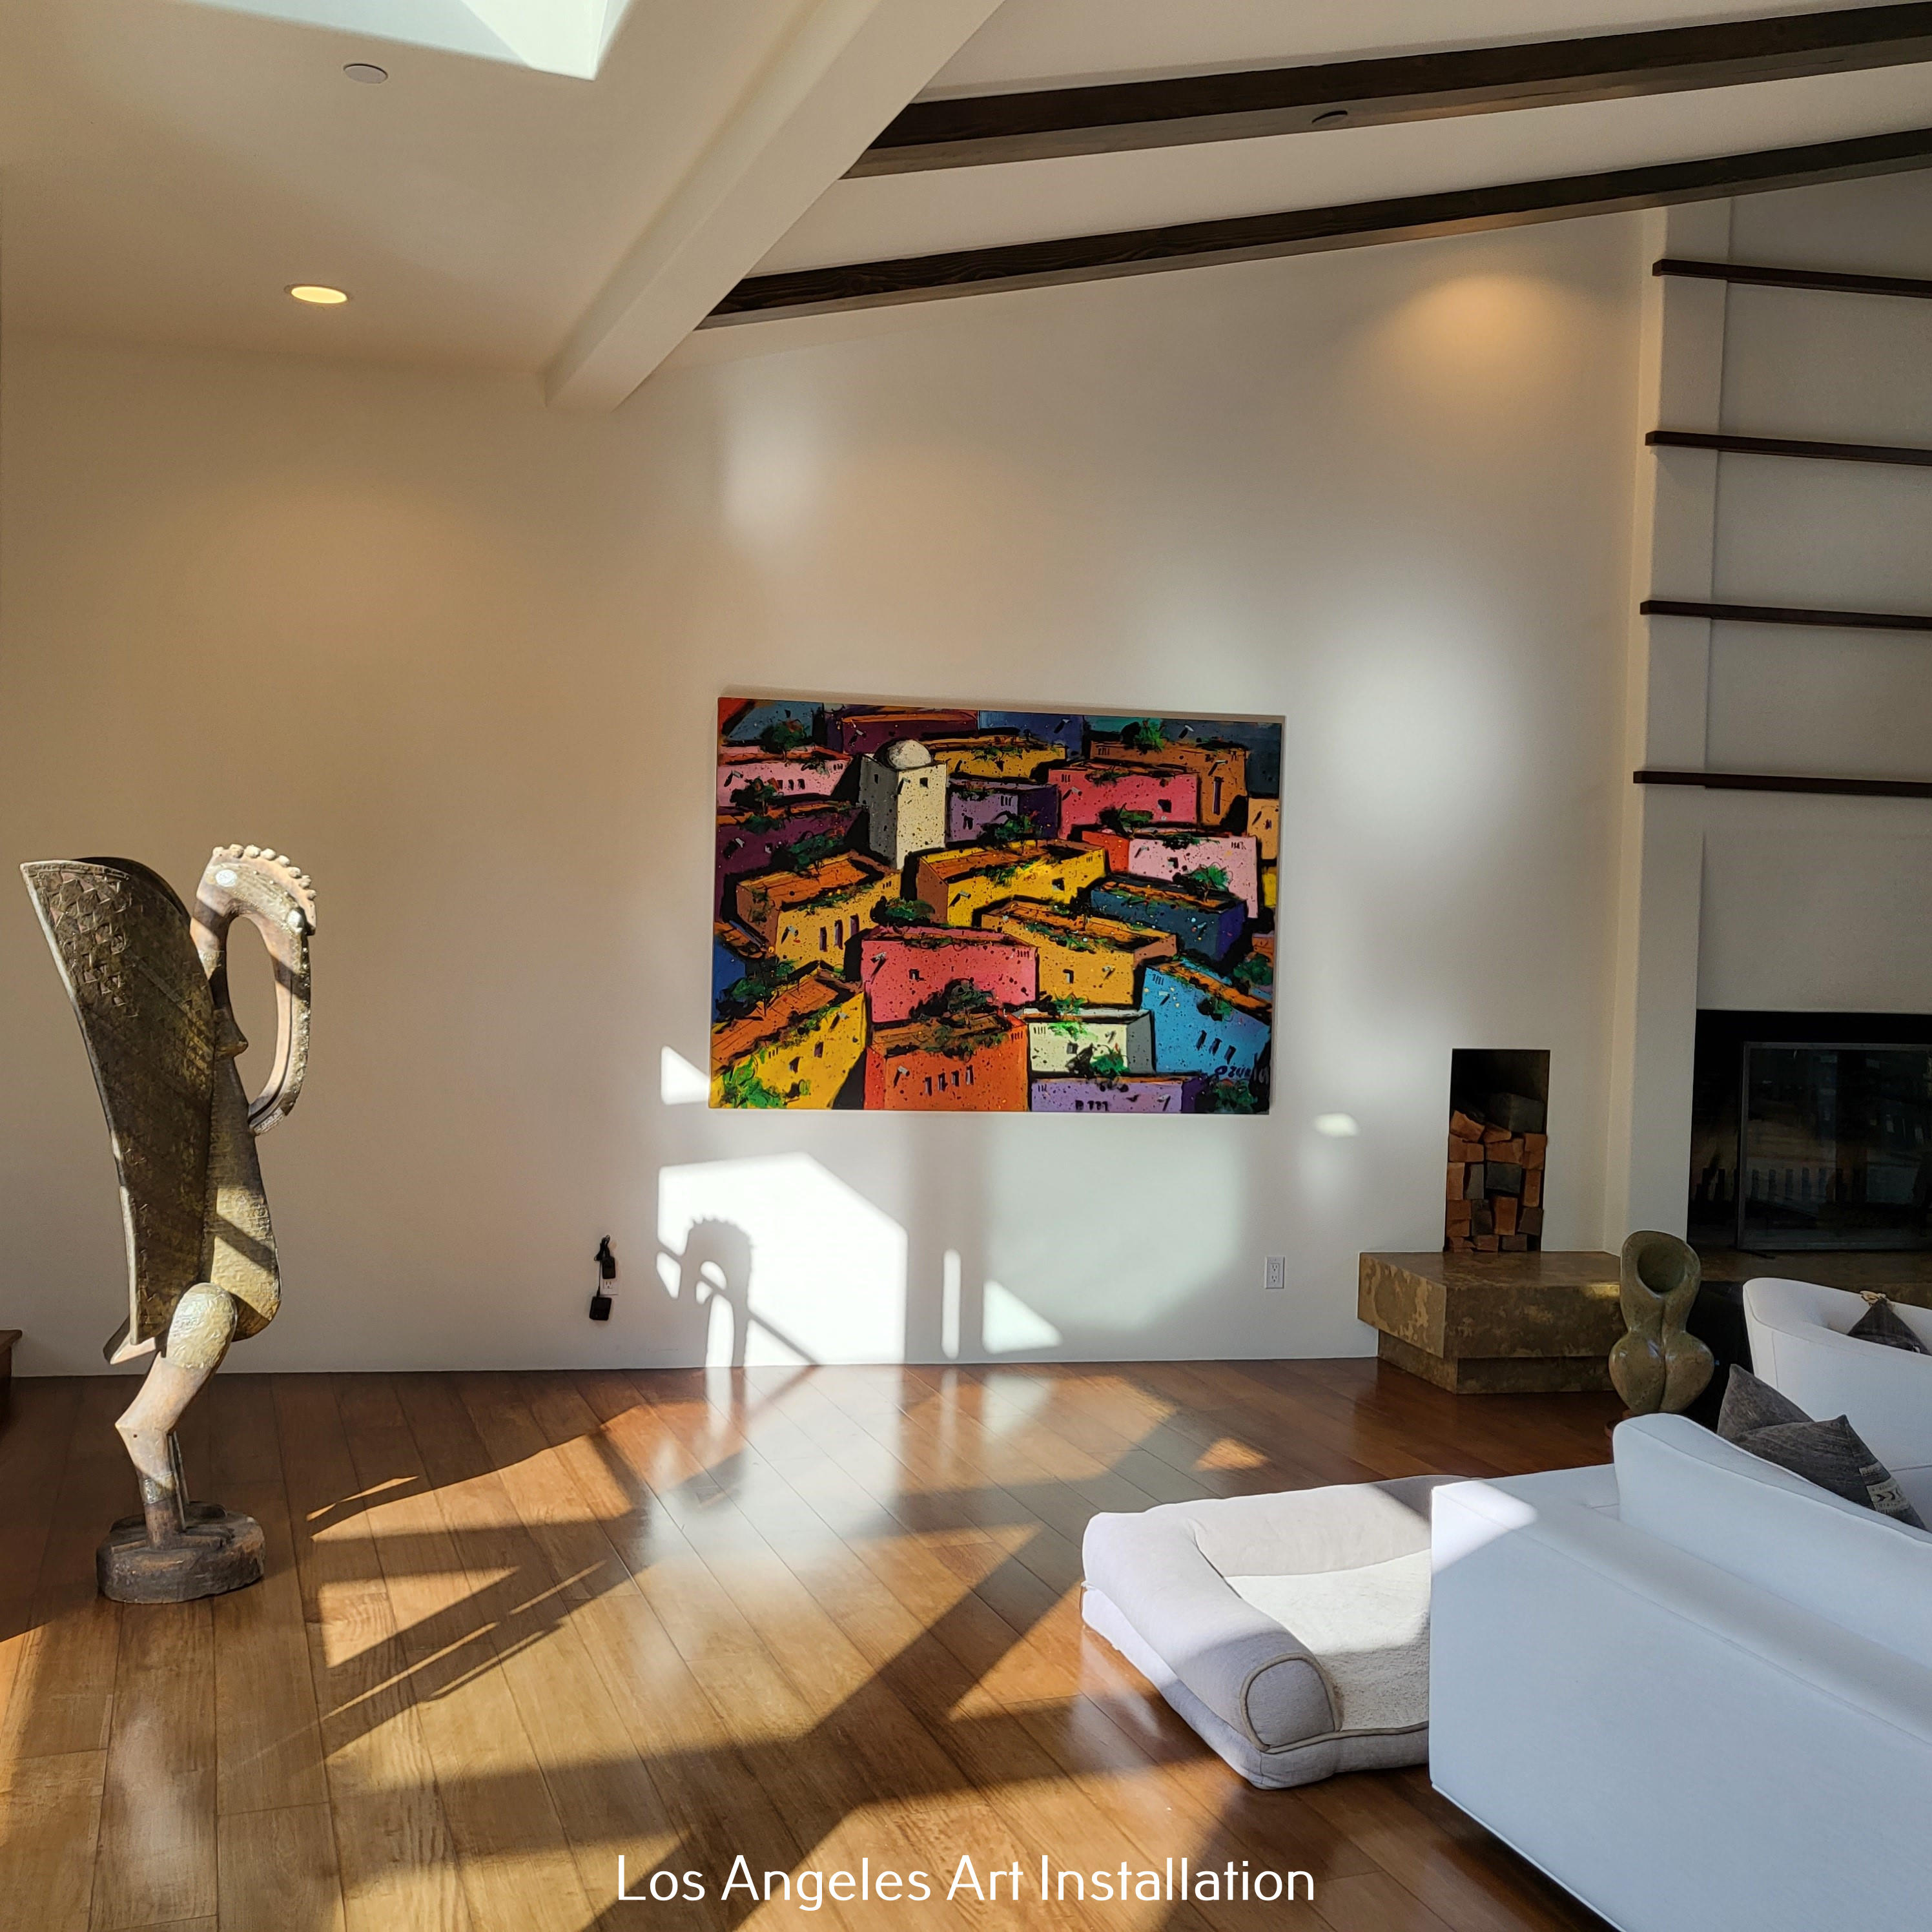 Loyal Creative Art Installation Services Explains What Makes Them The Best